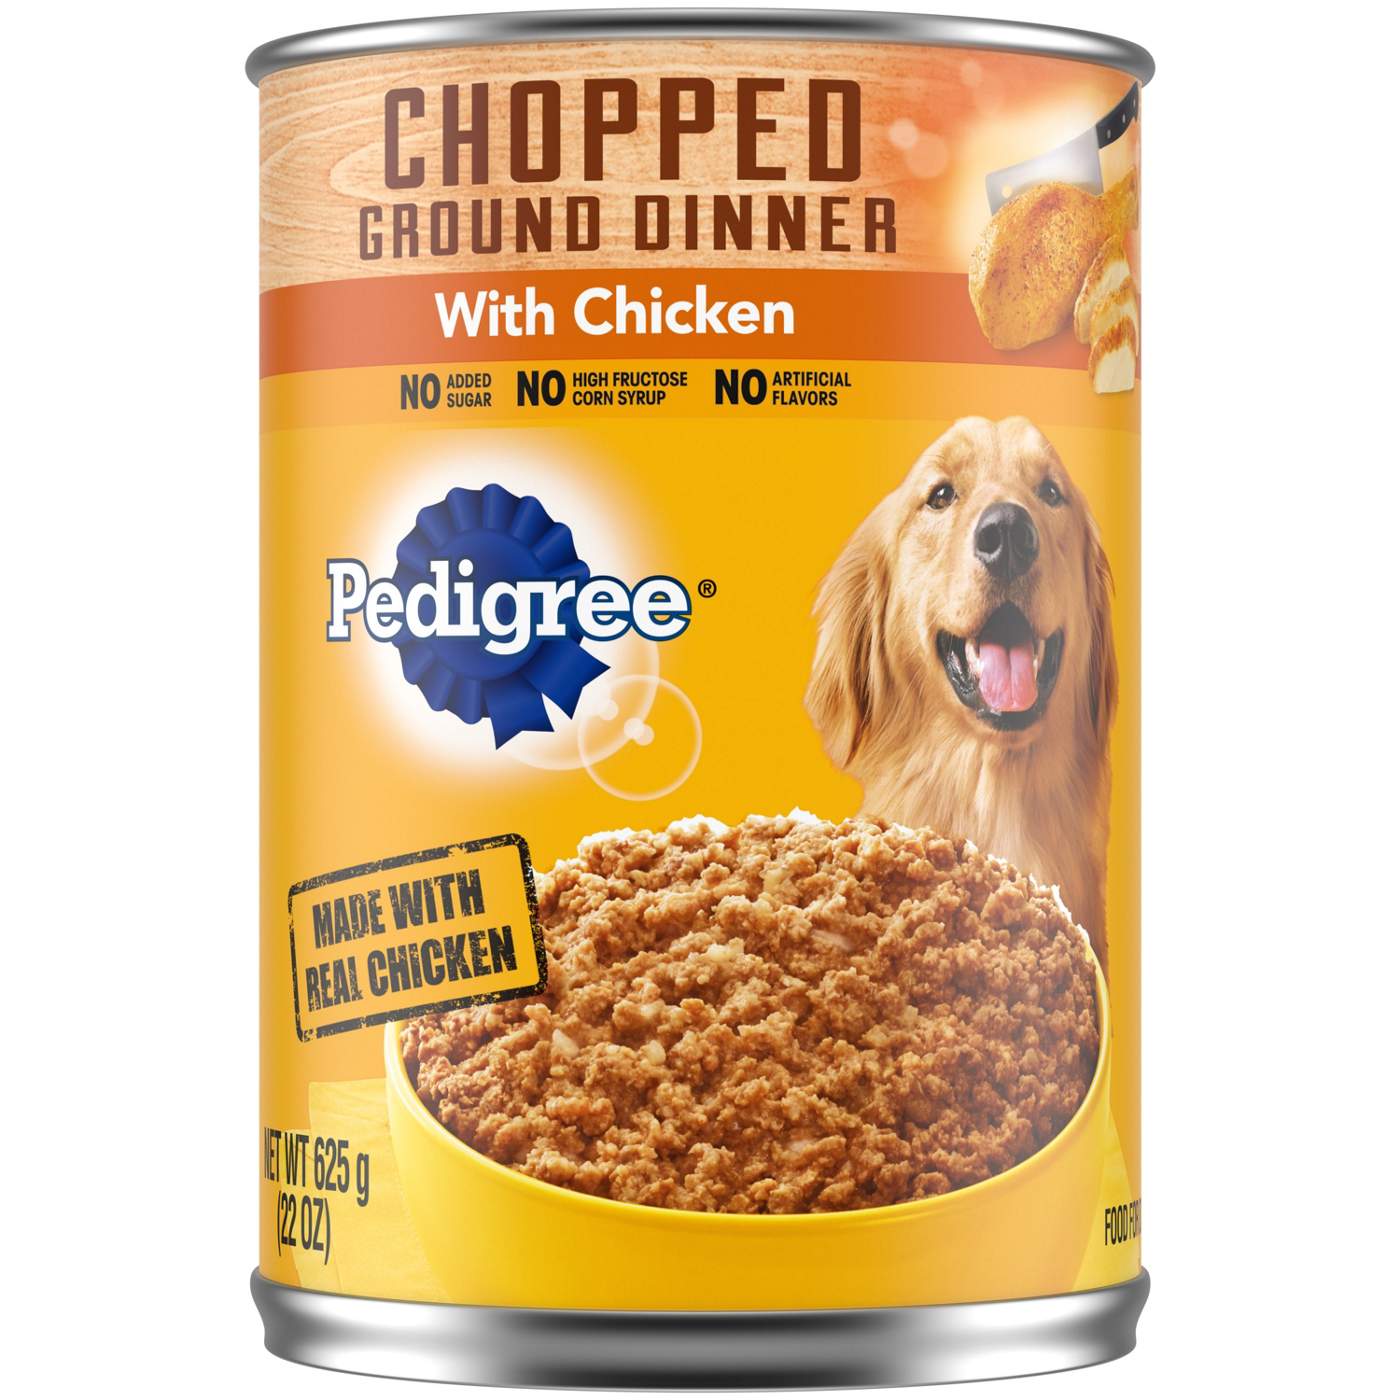 Pedigree Chopped Ground Dinner with Chicken Soft Wet Dog Food; image 1 of 5